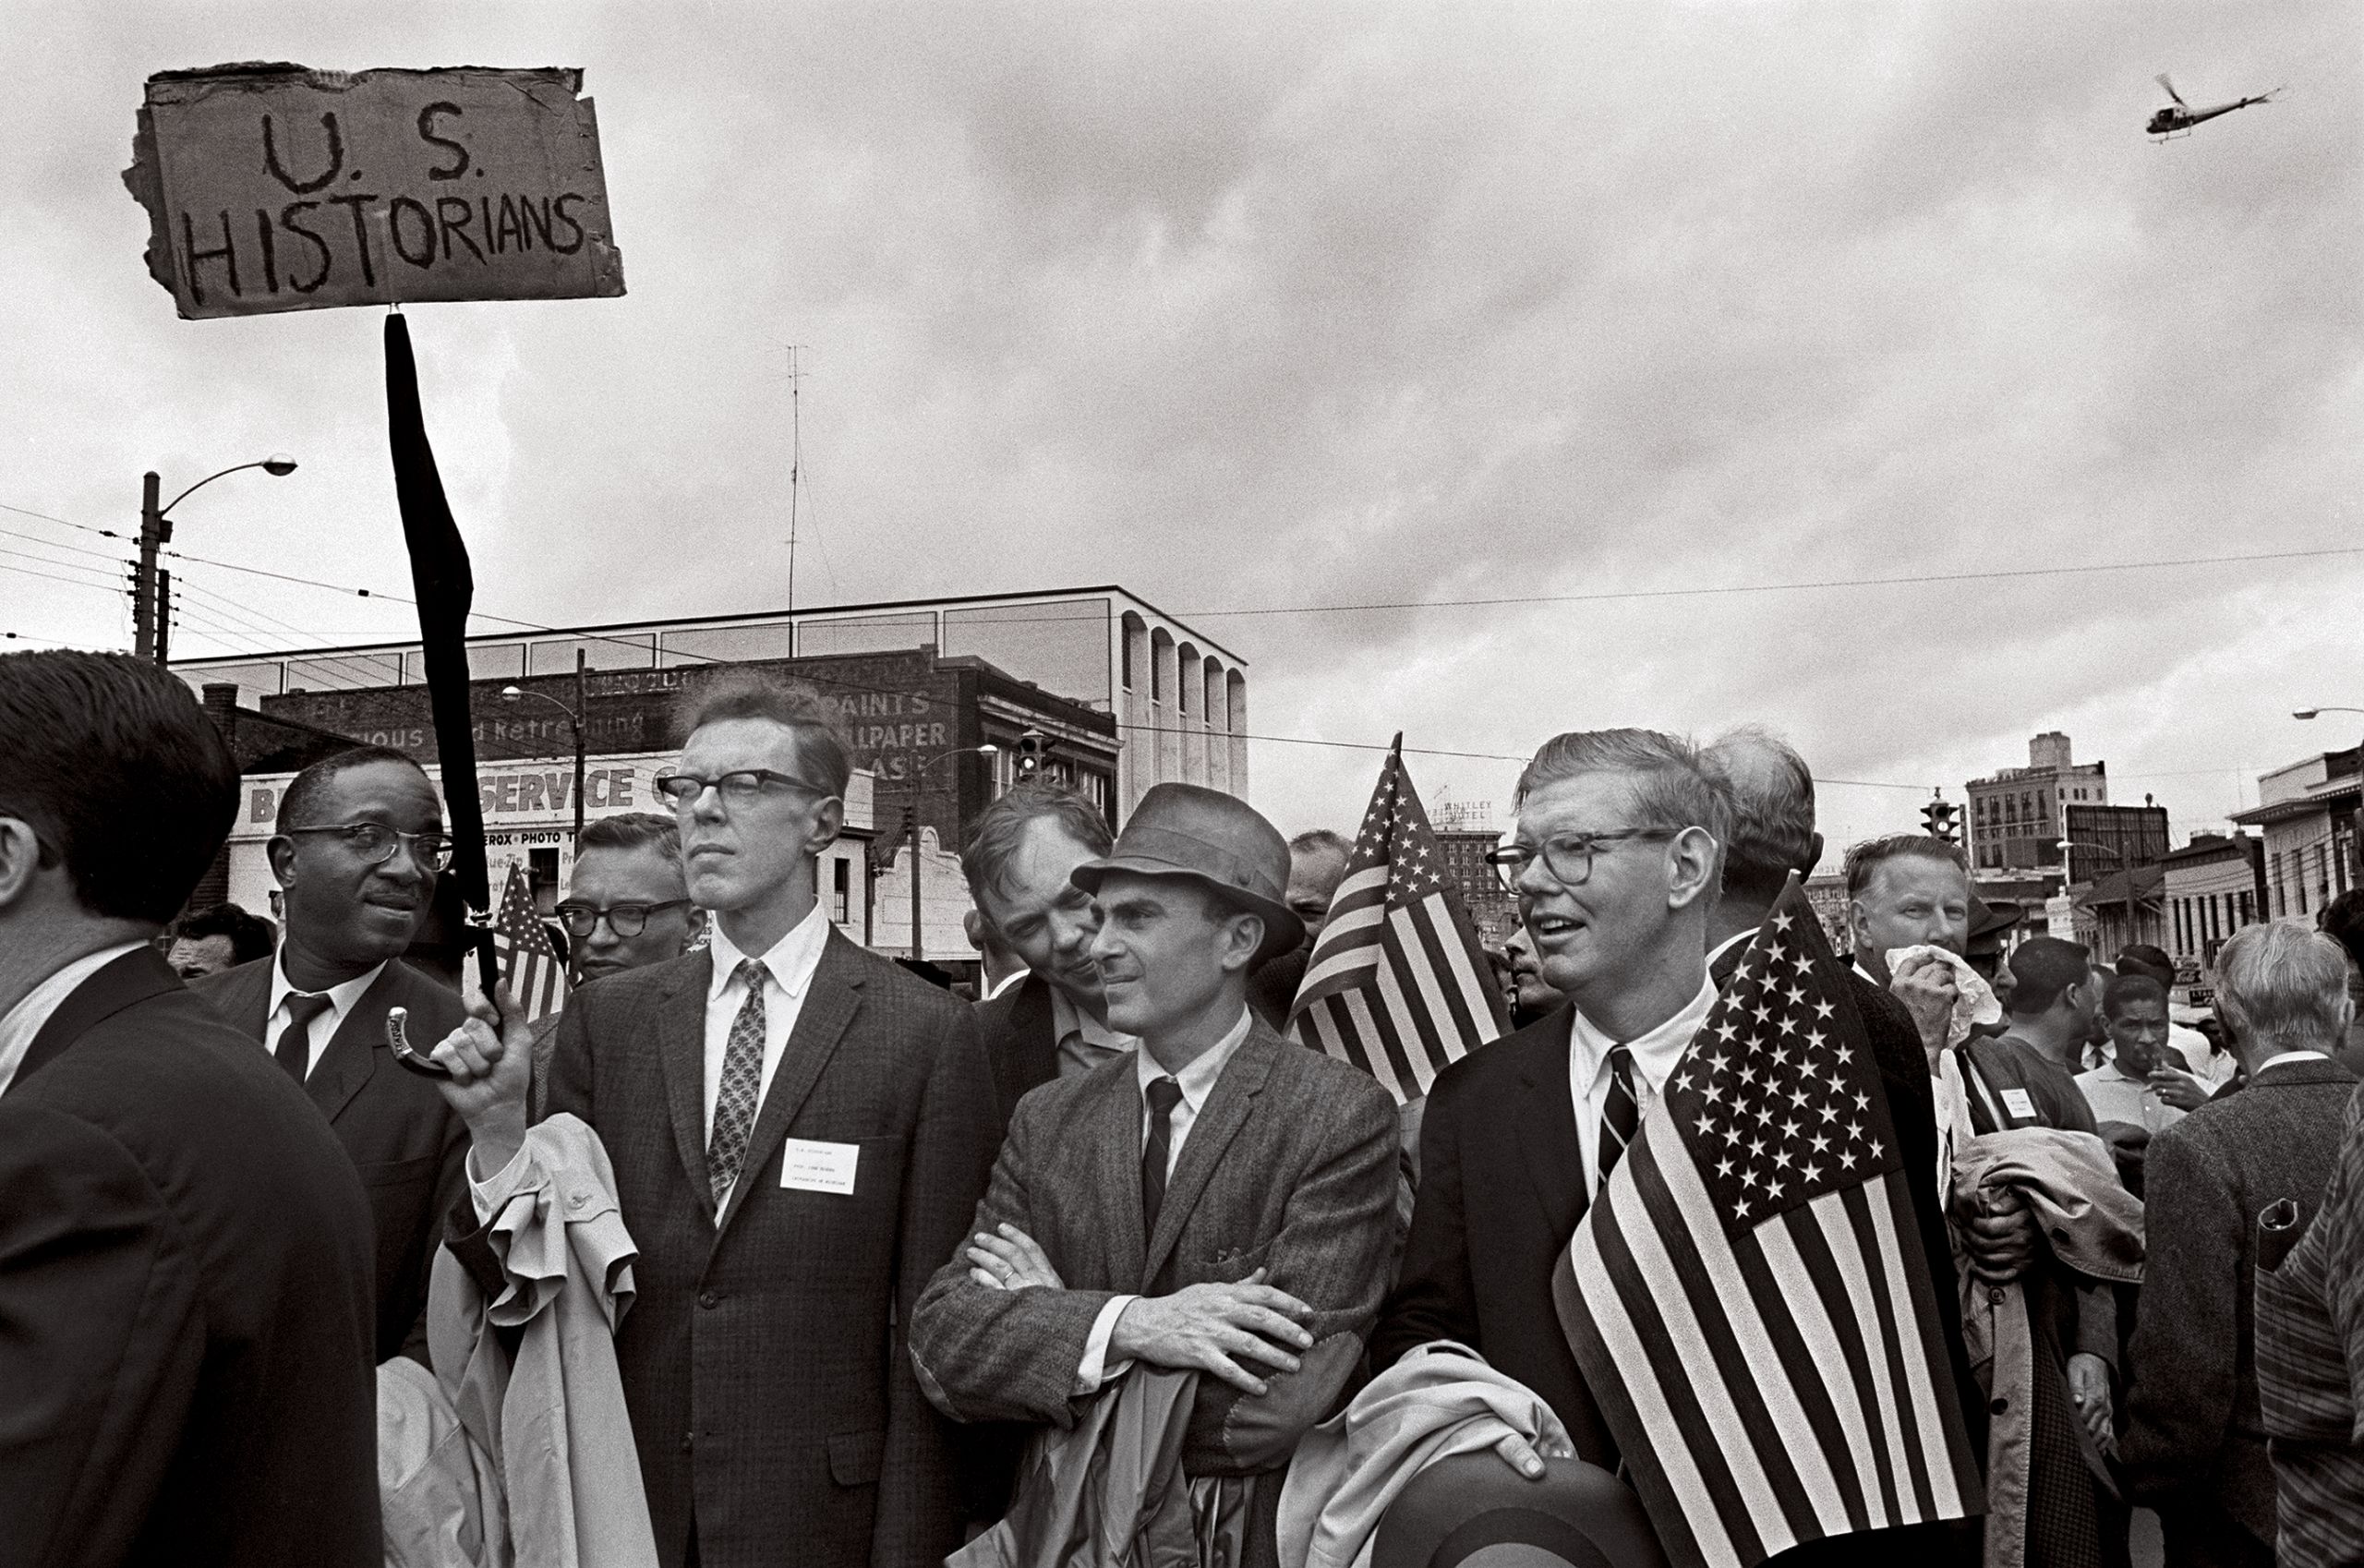 Leuchtenburg is shown with historians John Hope Franklin, John Higham and Arthur Mann at the 1965 Selma-to-Montgomery march. (Photo copyright by Dennis Hopper, courtesy of the Hopper Art Trust)